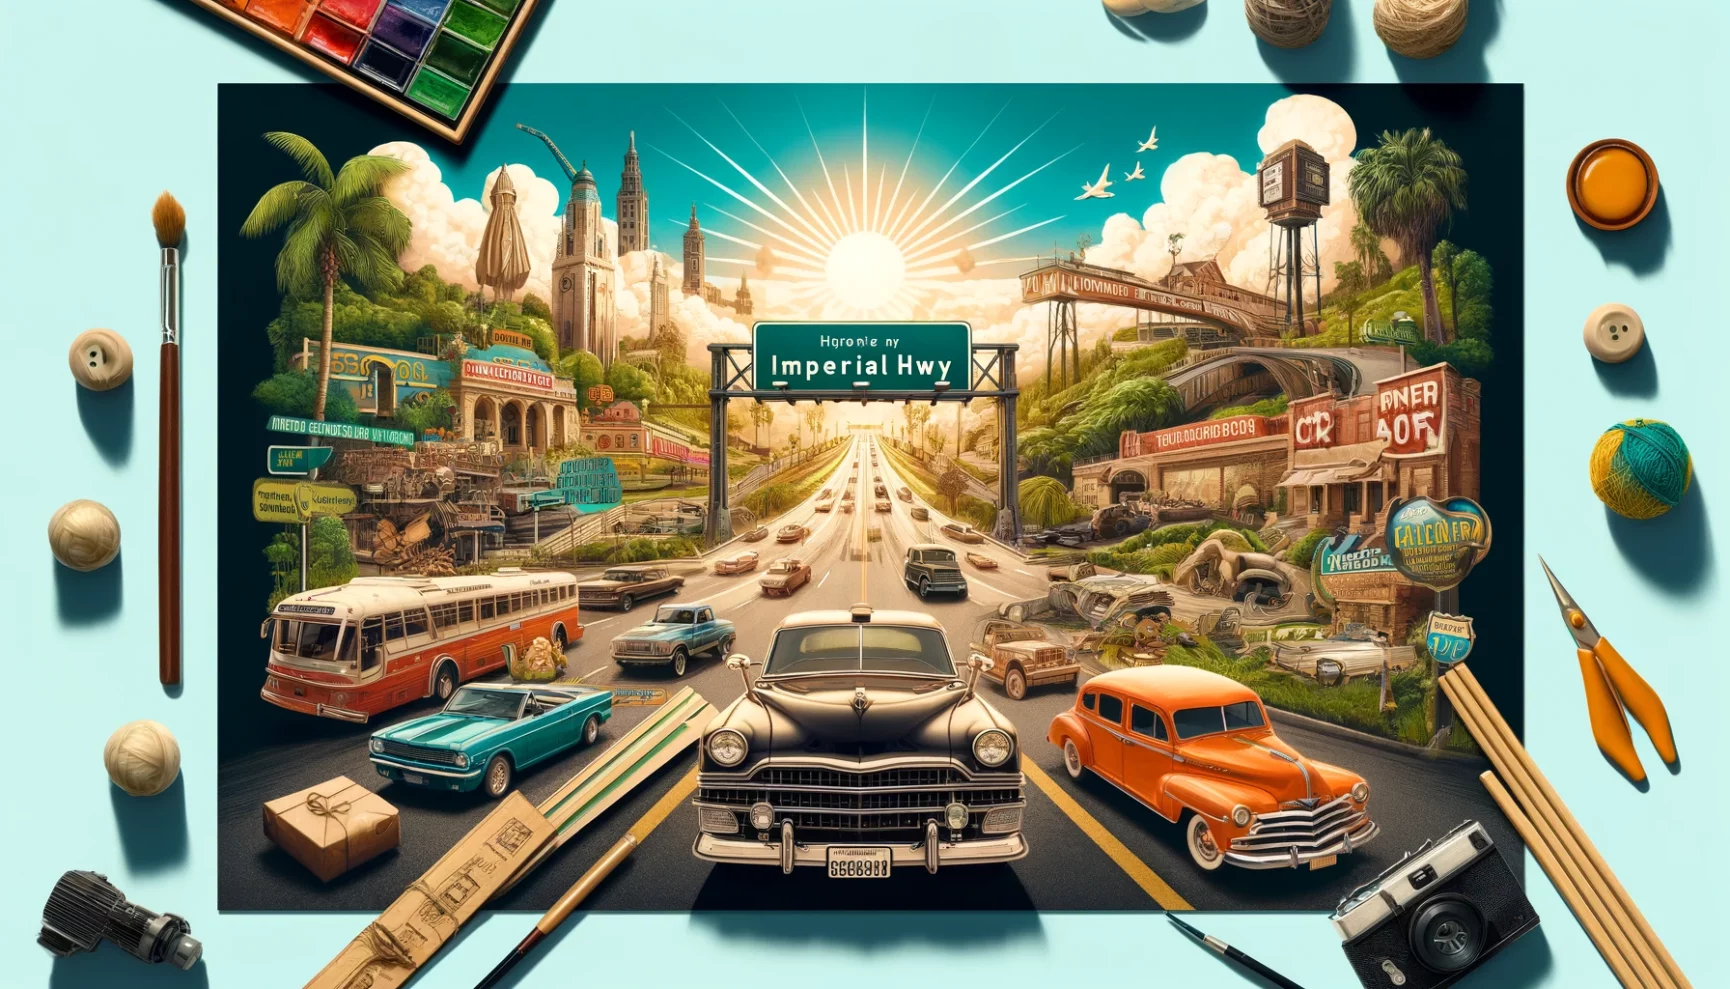 A stylized illustration featuring a vintage car on a road leading to a cityscape, surrounded by various artistic and nostalgic elements against a blue sky background.